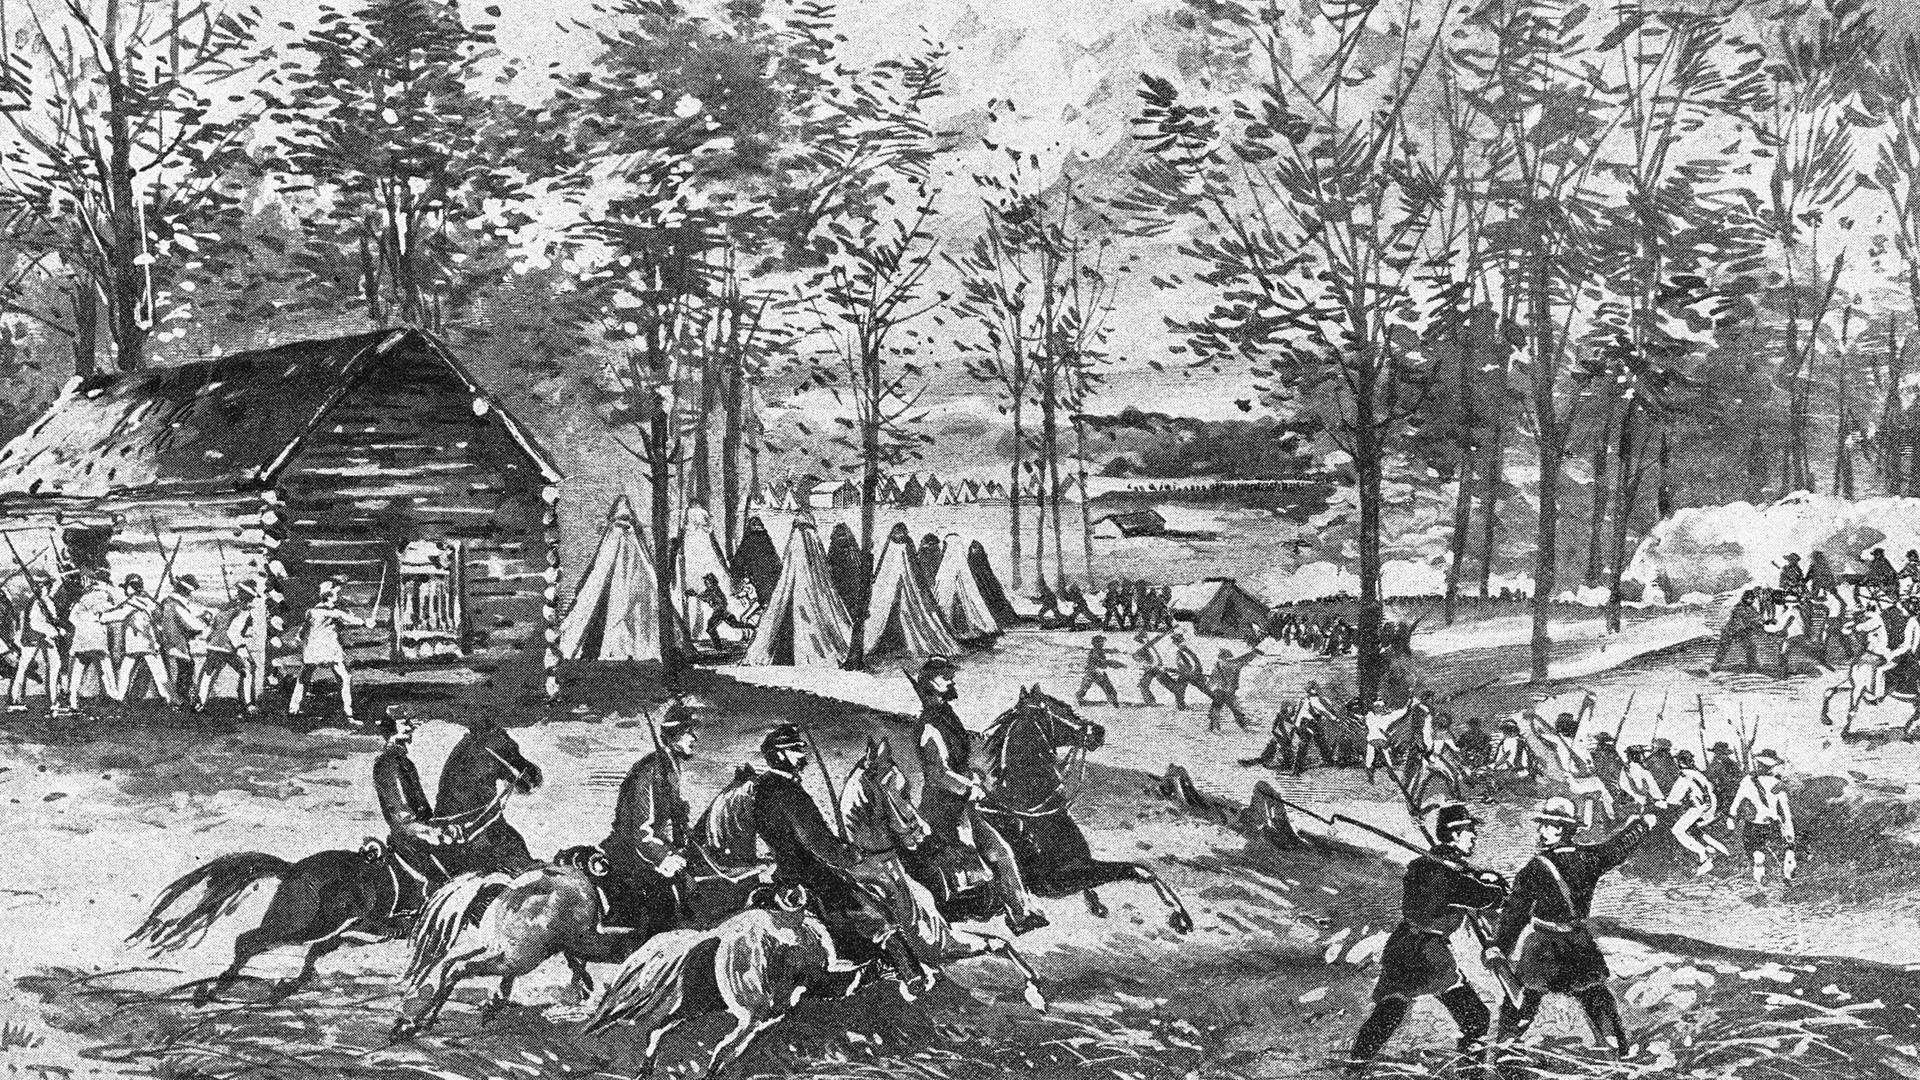 Black and white painting of a civil war scene in Tennessee